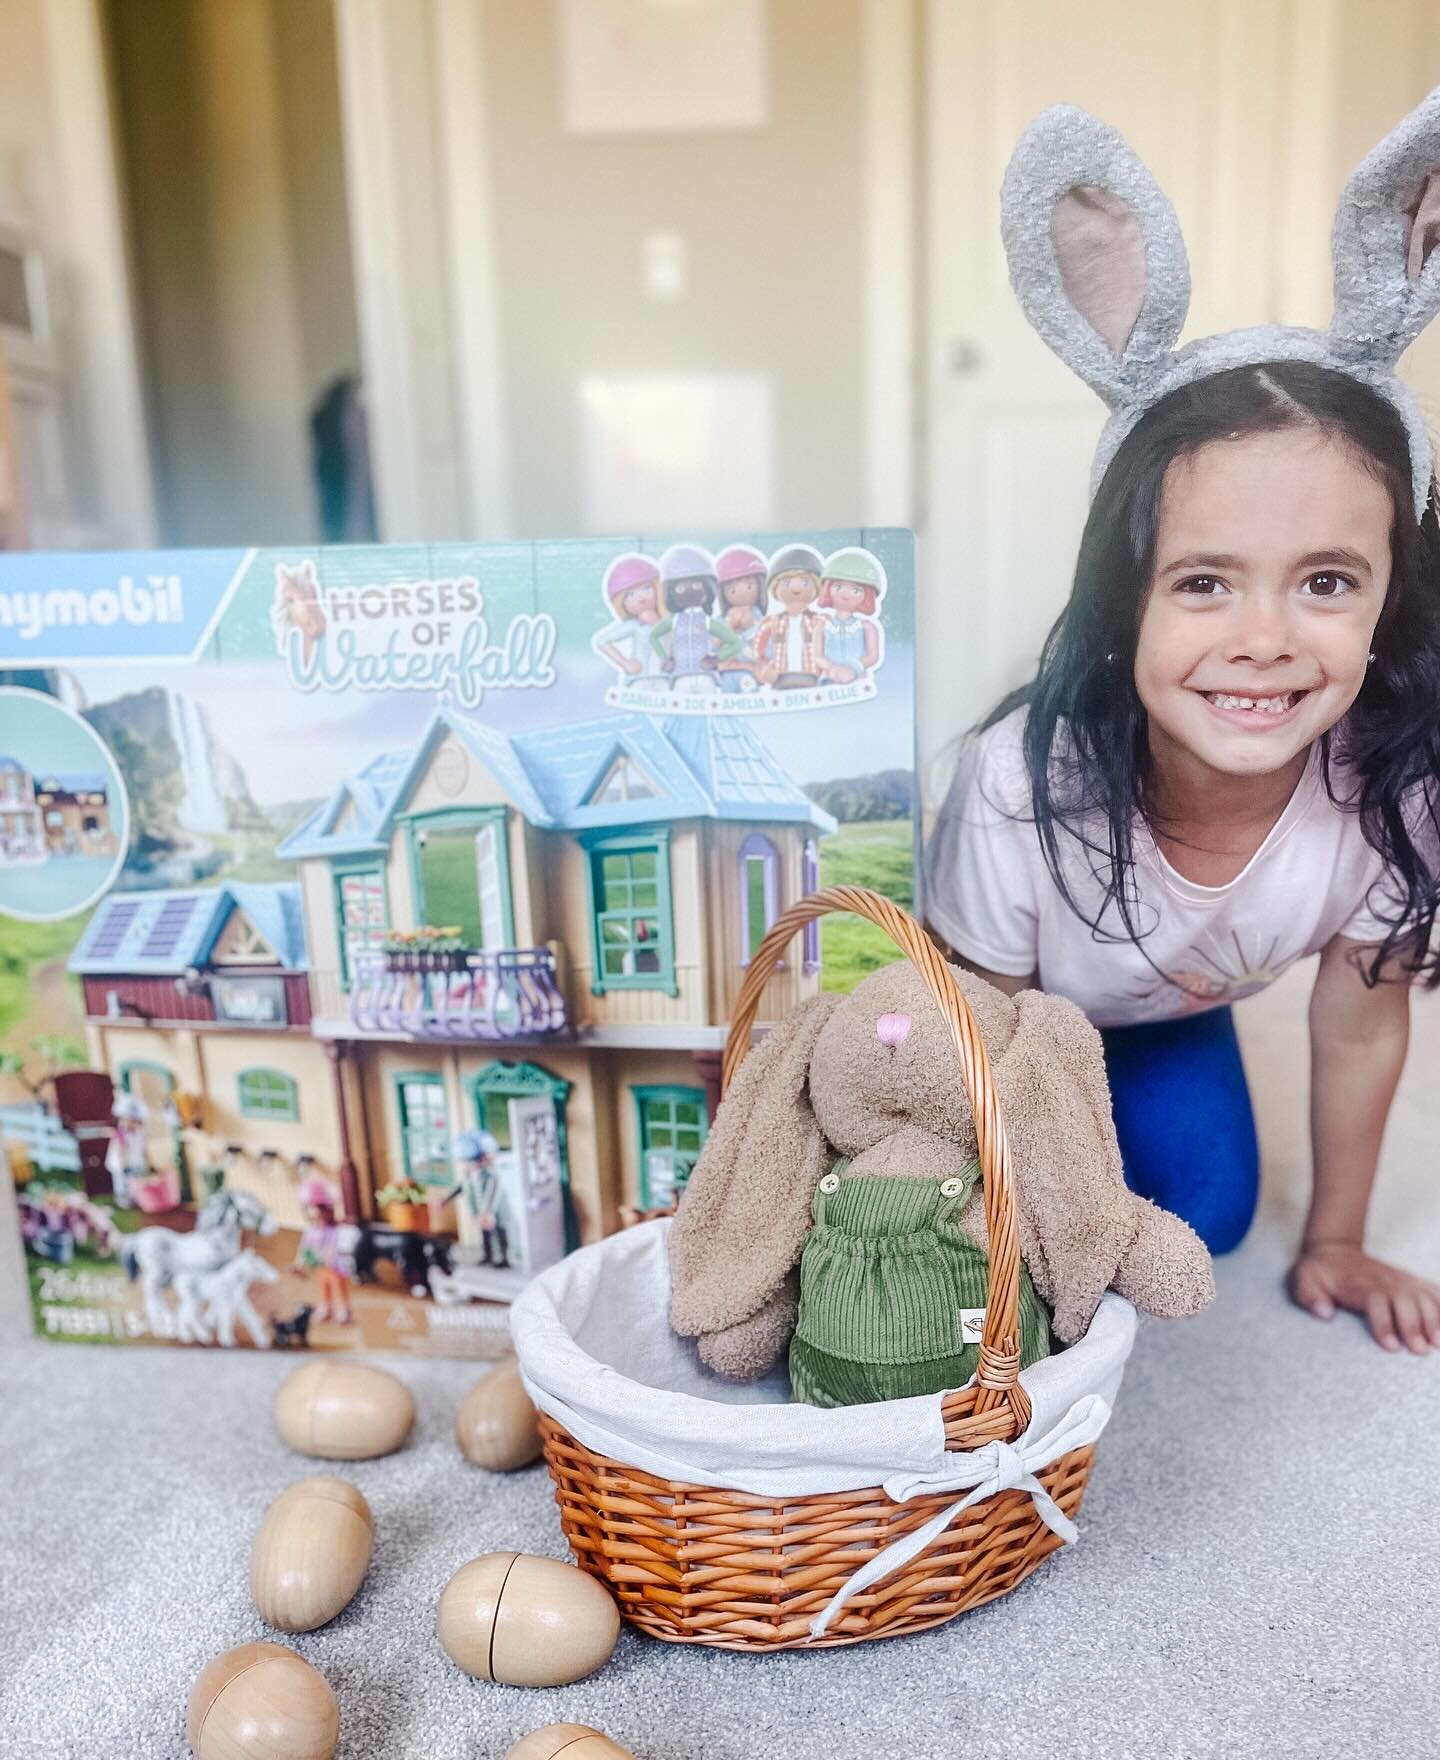 Oh Ezri and her love for bunnies 🤍 
Easter weekend is here and we are still gathering things for baskets and planning our Easter Egg Hunt but wanted to share about @playmobil and all of their amazing products for an idea for Easter gifts this year. 